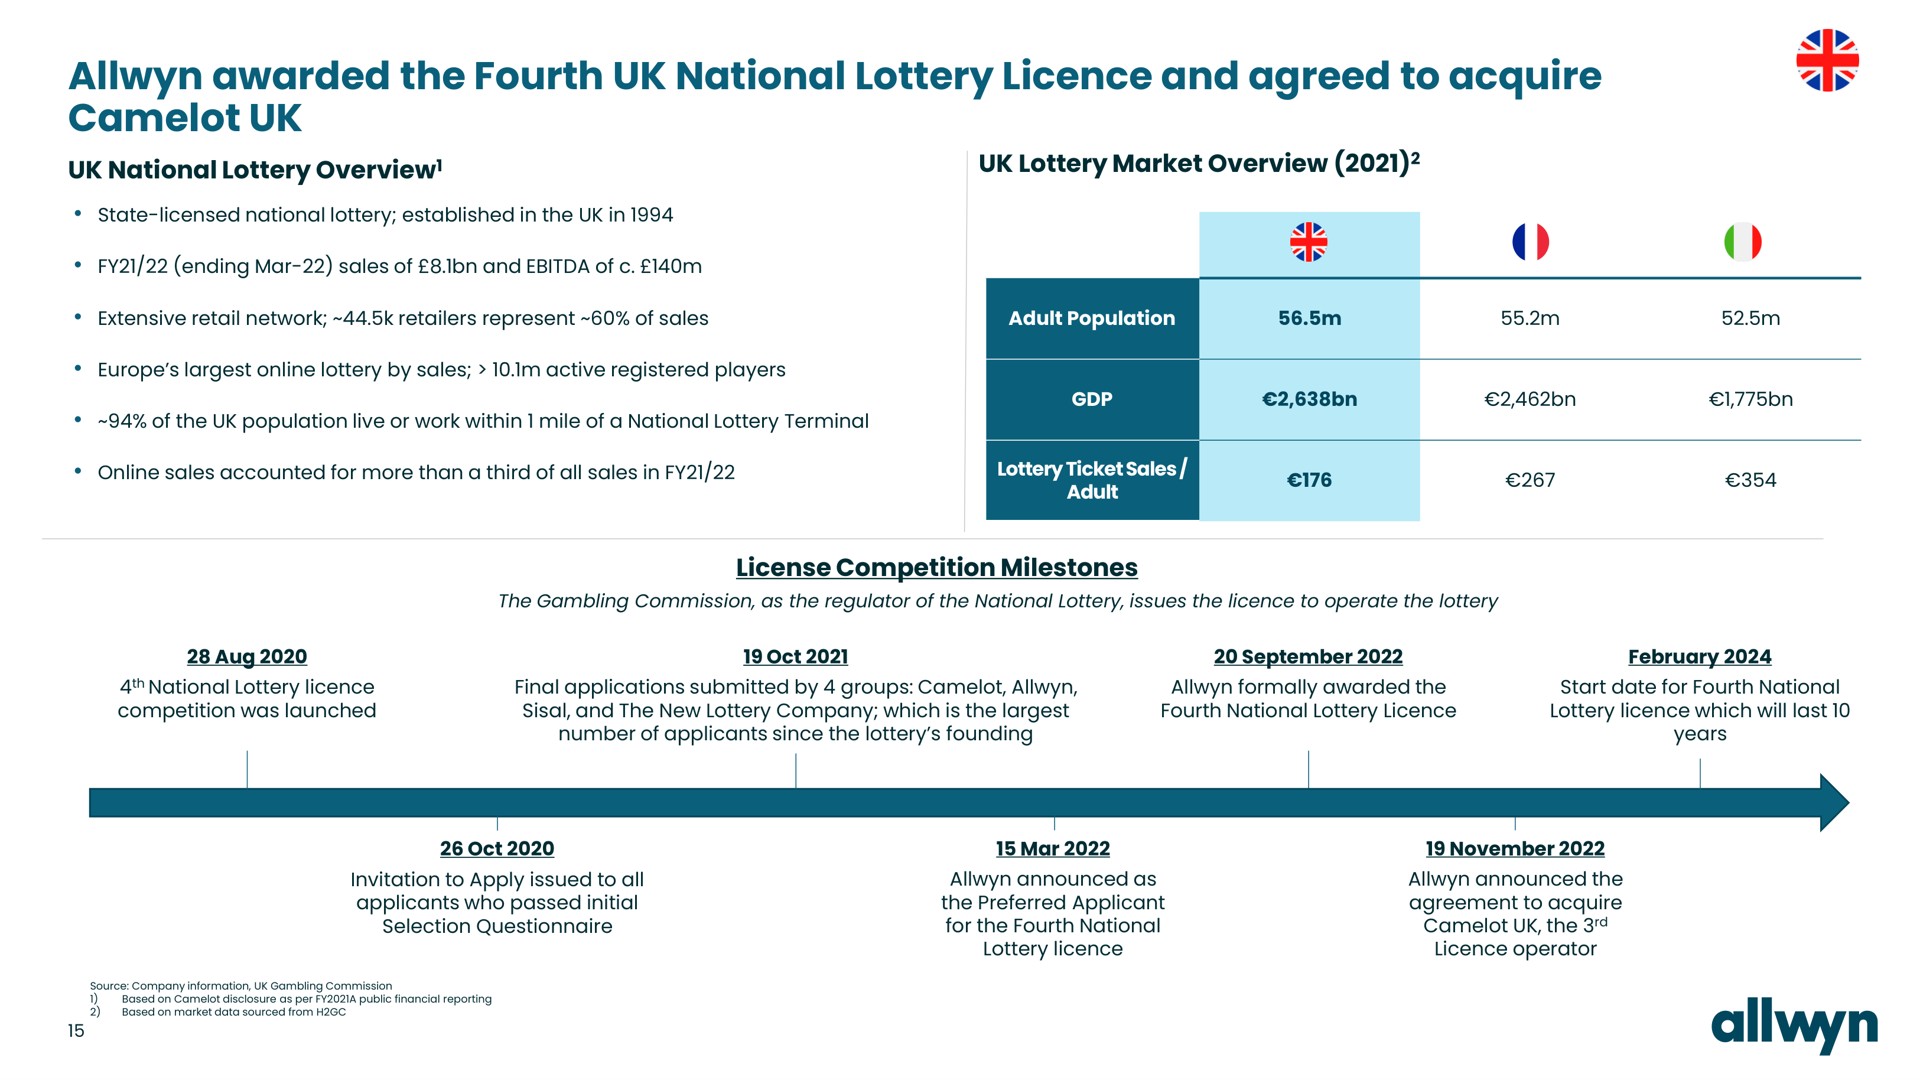 awarded the fourth national lottery and agreed to acquire i | Allwyn